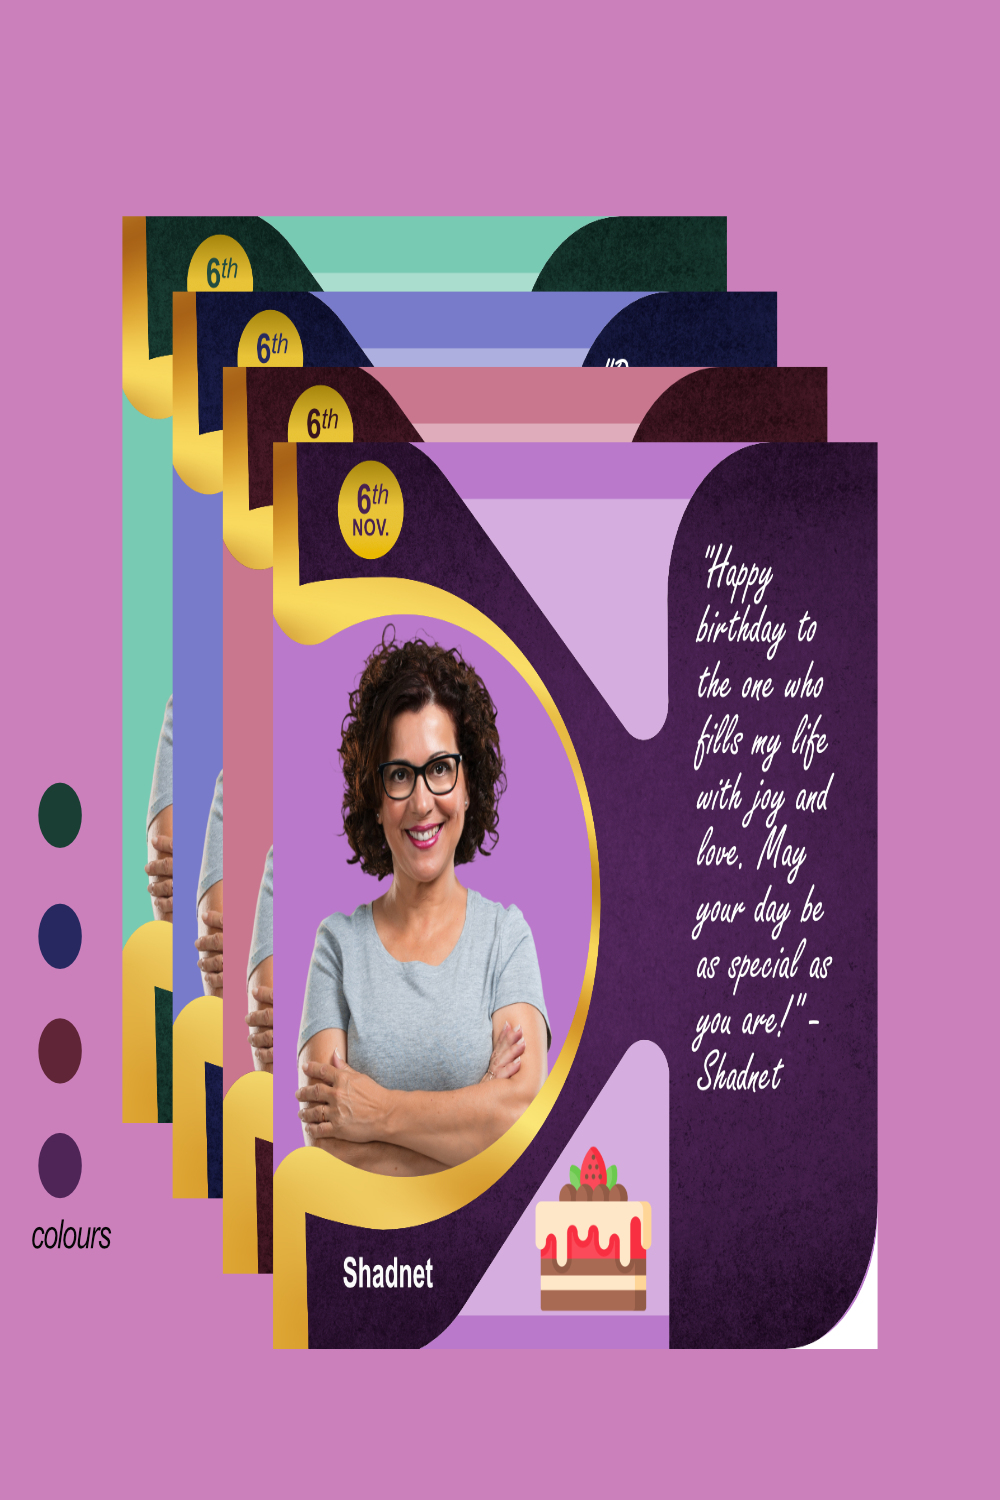 8 Beautiful Background Birthday Cards with Inspiring Birthday Wishes pinterest preview image.